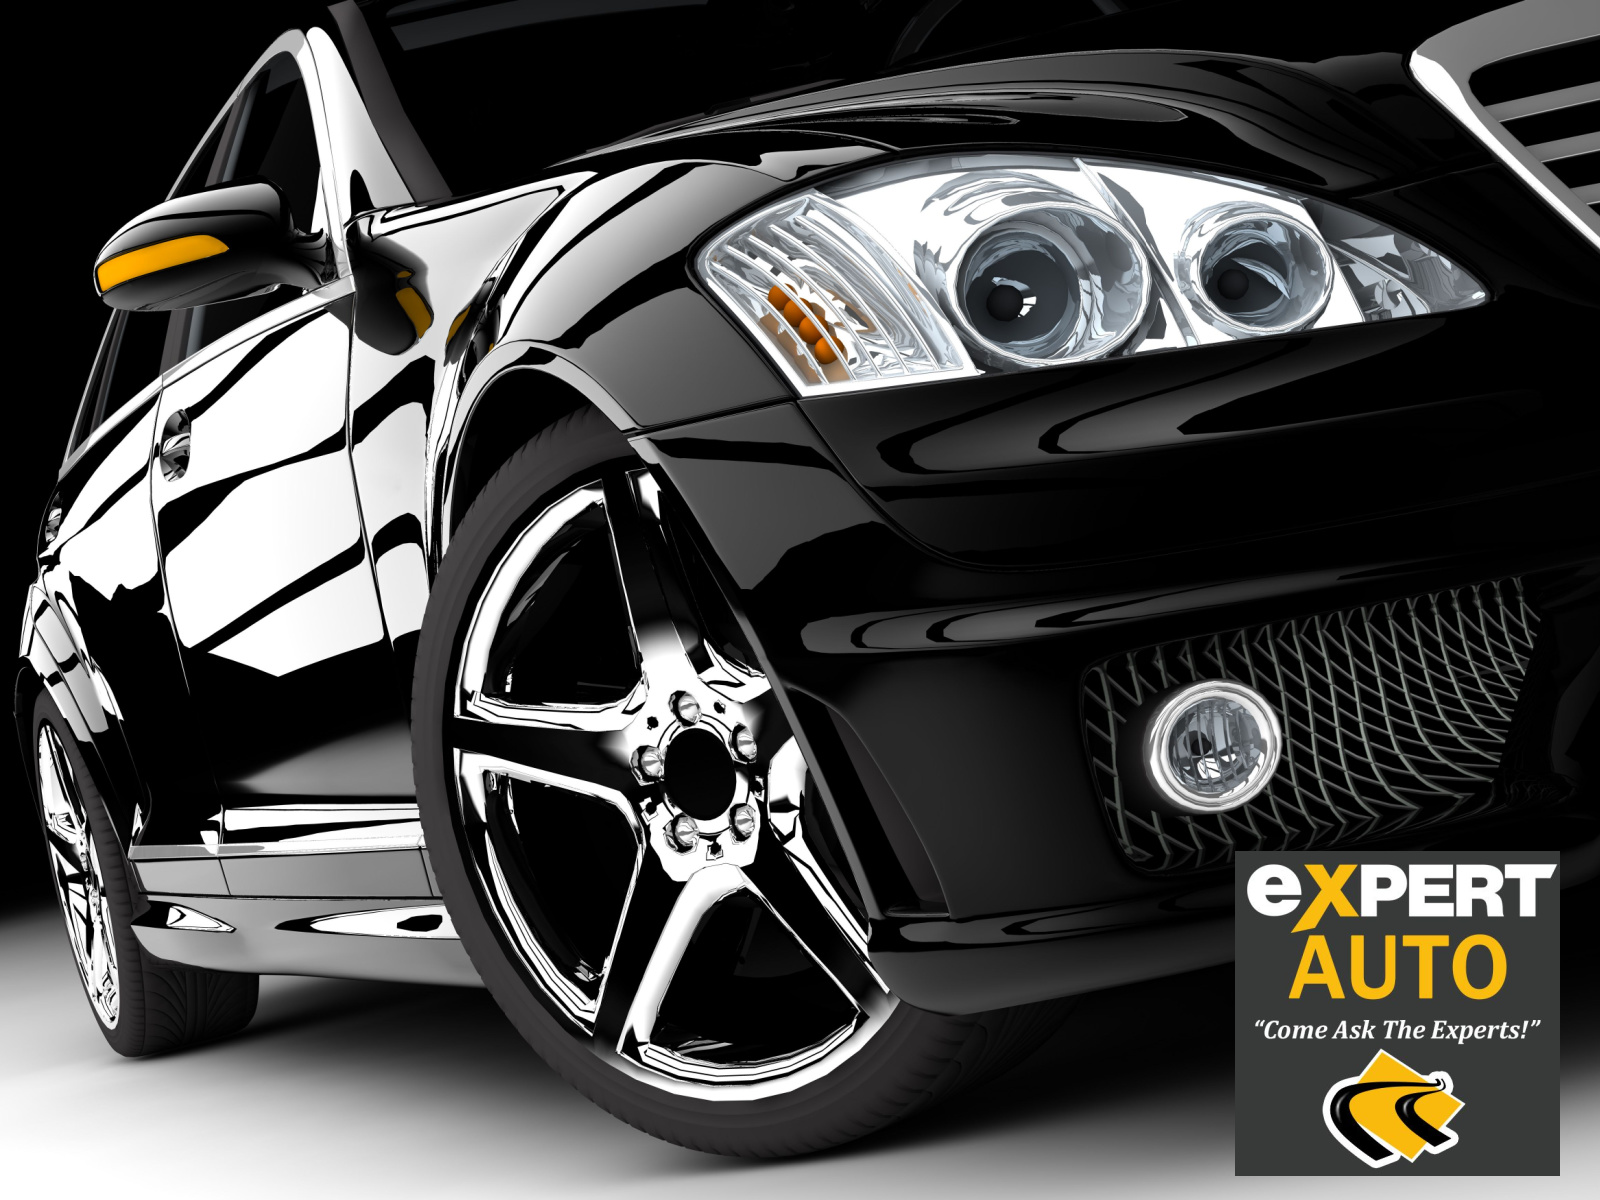 Expert Auto Is Your Trusted Used Auto Dealership Near Alexandria